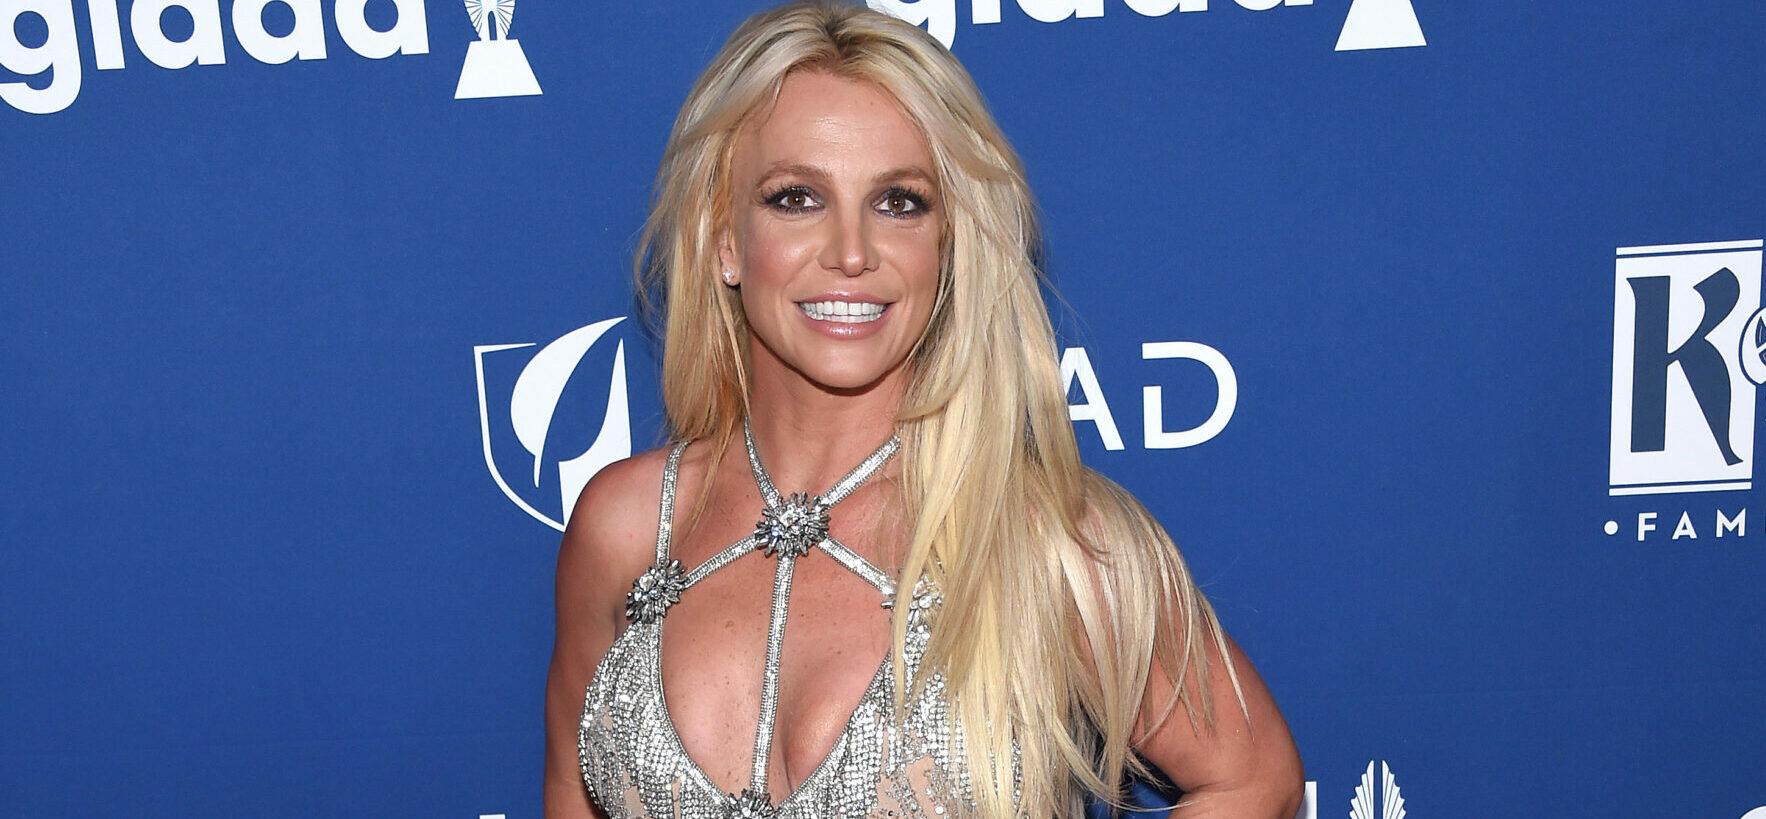 Britney Spears Shows Some Skin Tugging Down Her Dress